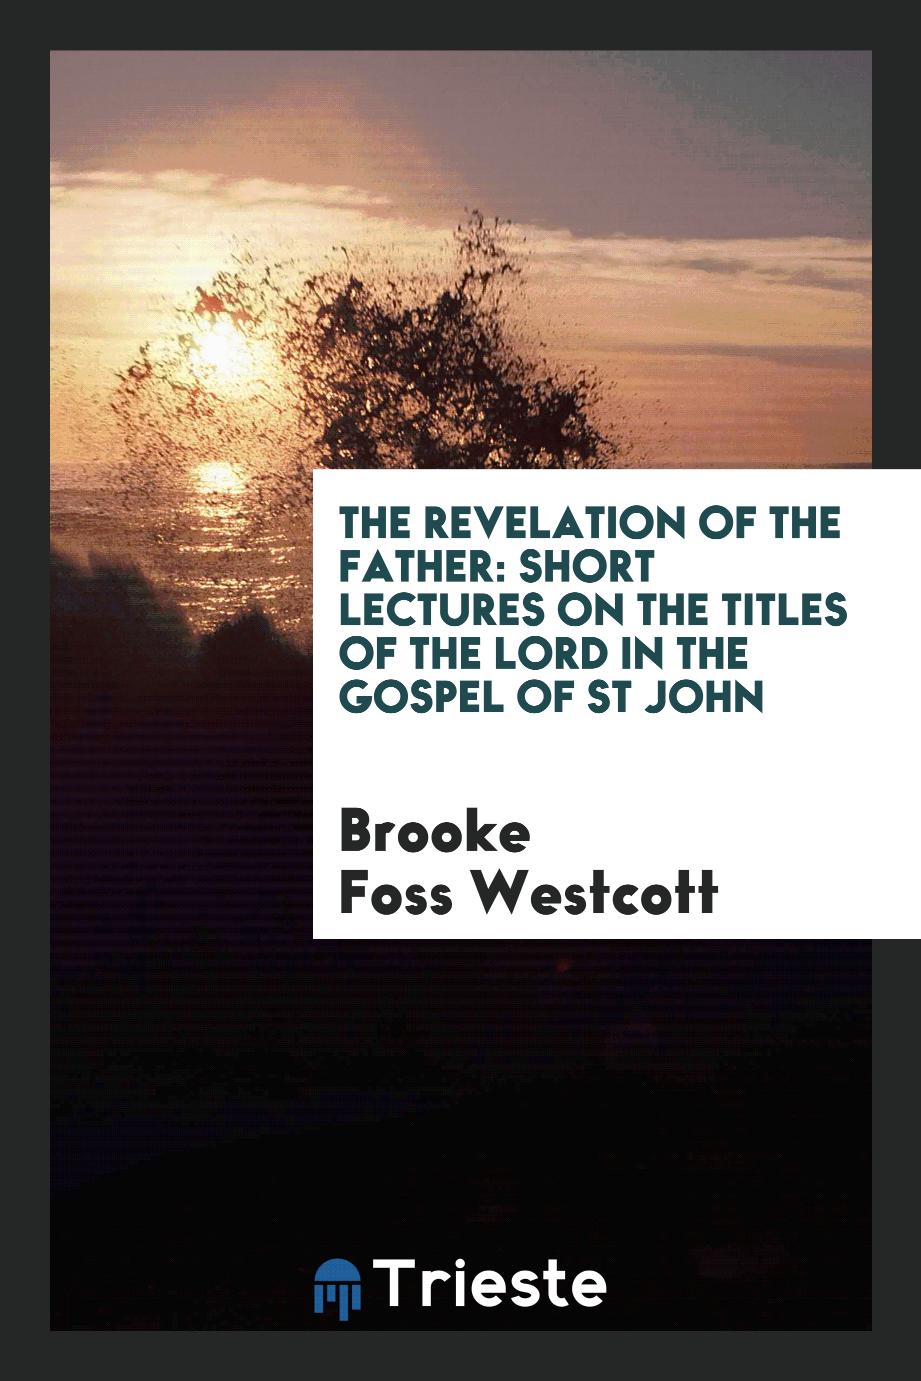 The revelation of the Father: short lectures on the titles of the Lord in the Gospel of St John